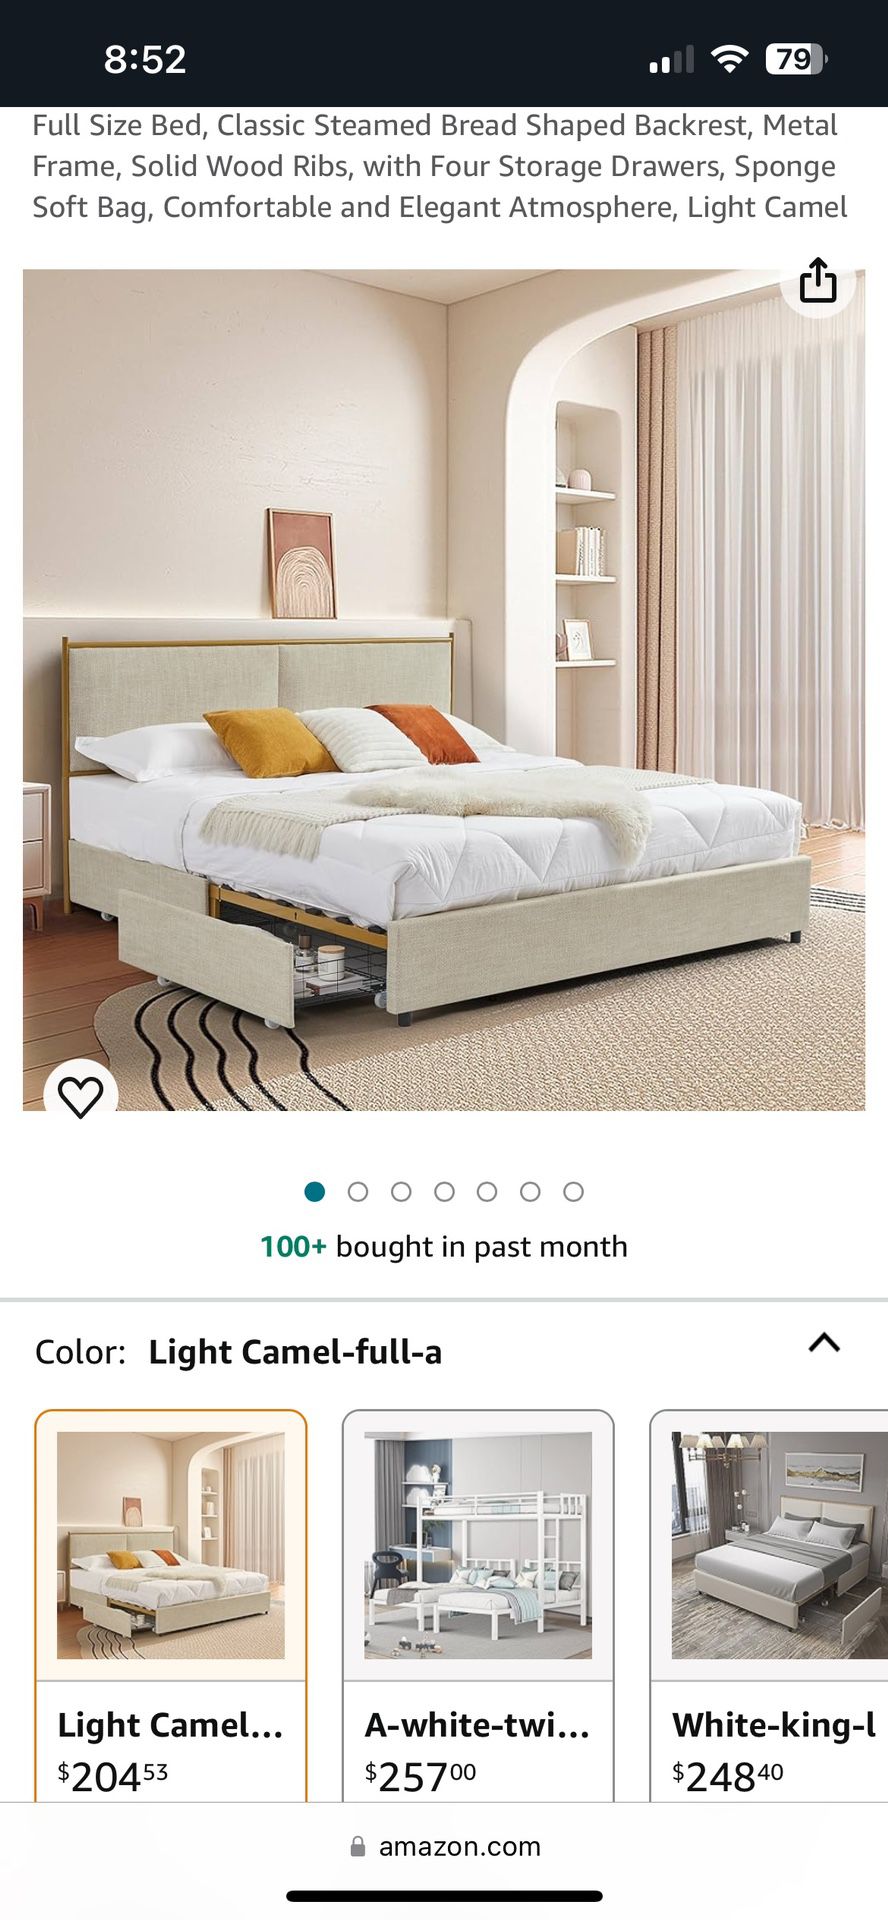 Full Size Bed, Classic Steamed Bread Shaped Backrest, Metal Frame, Solid Wood Ribs, with Four Storage Drawers, Sponge Soft Bag, Comfortable and Elegan